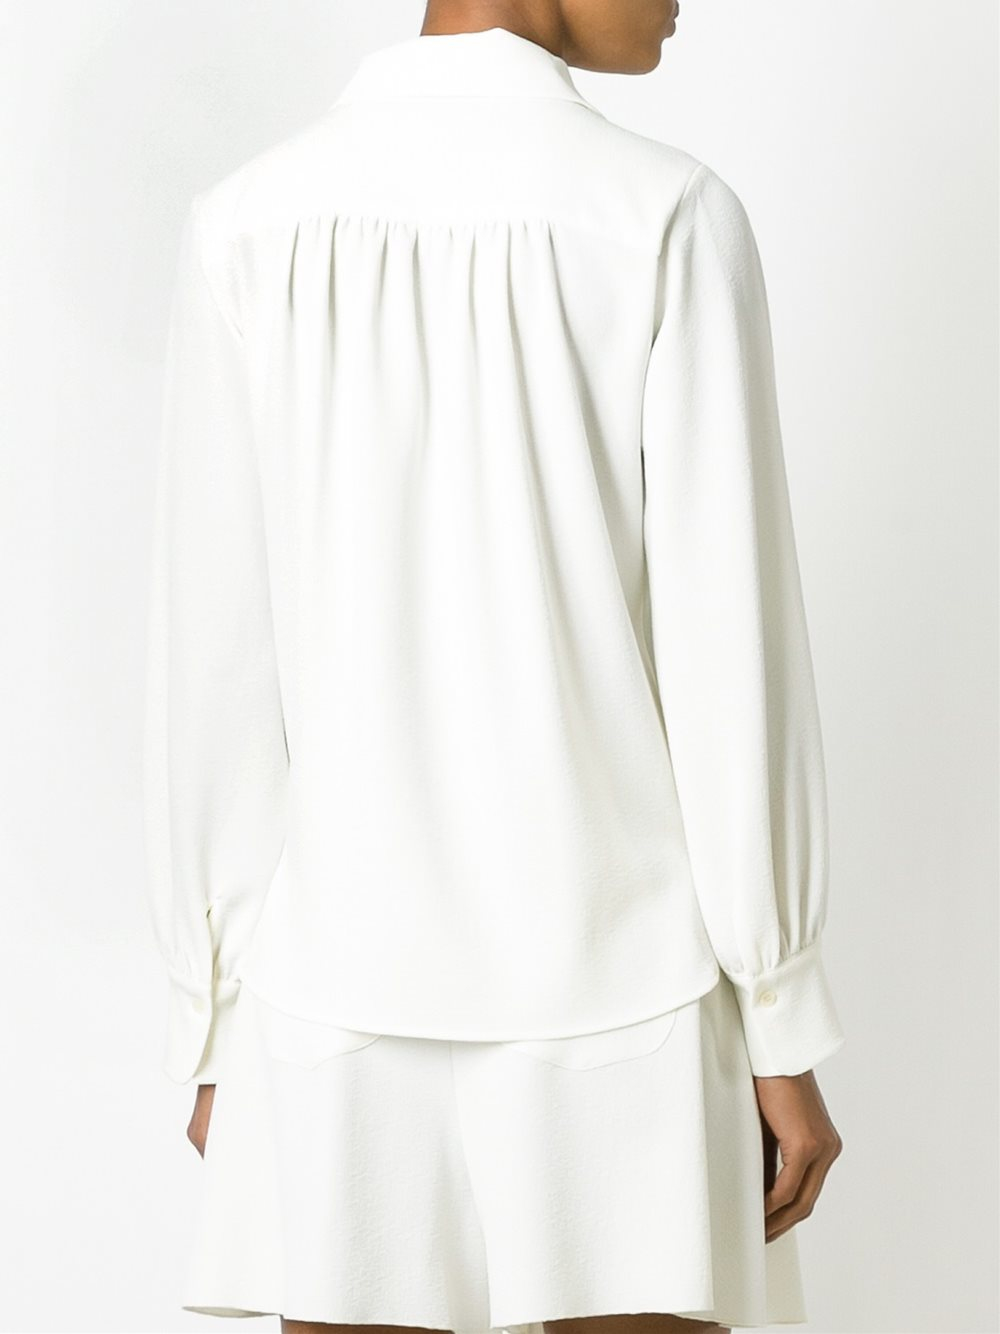 See by chloé Daisy Top in White | Lyst